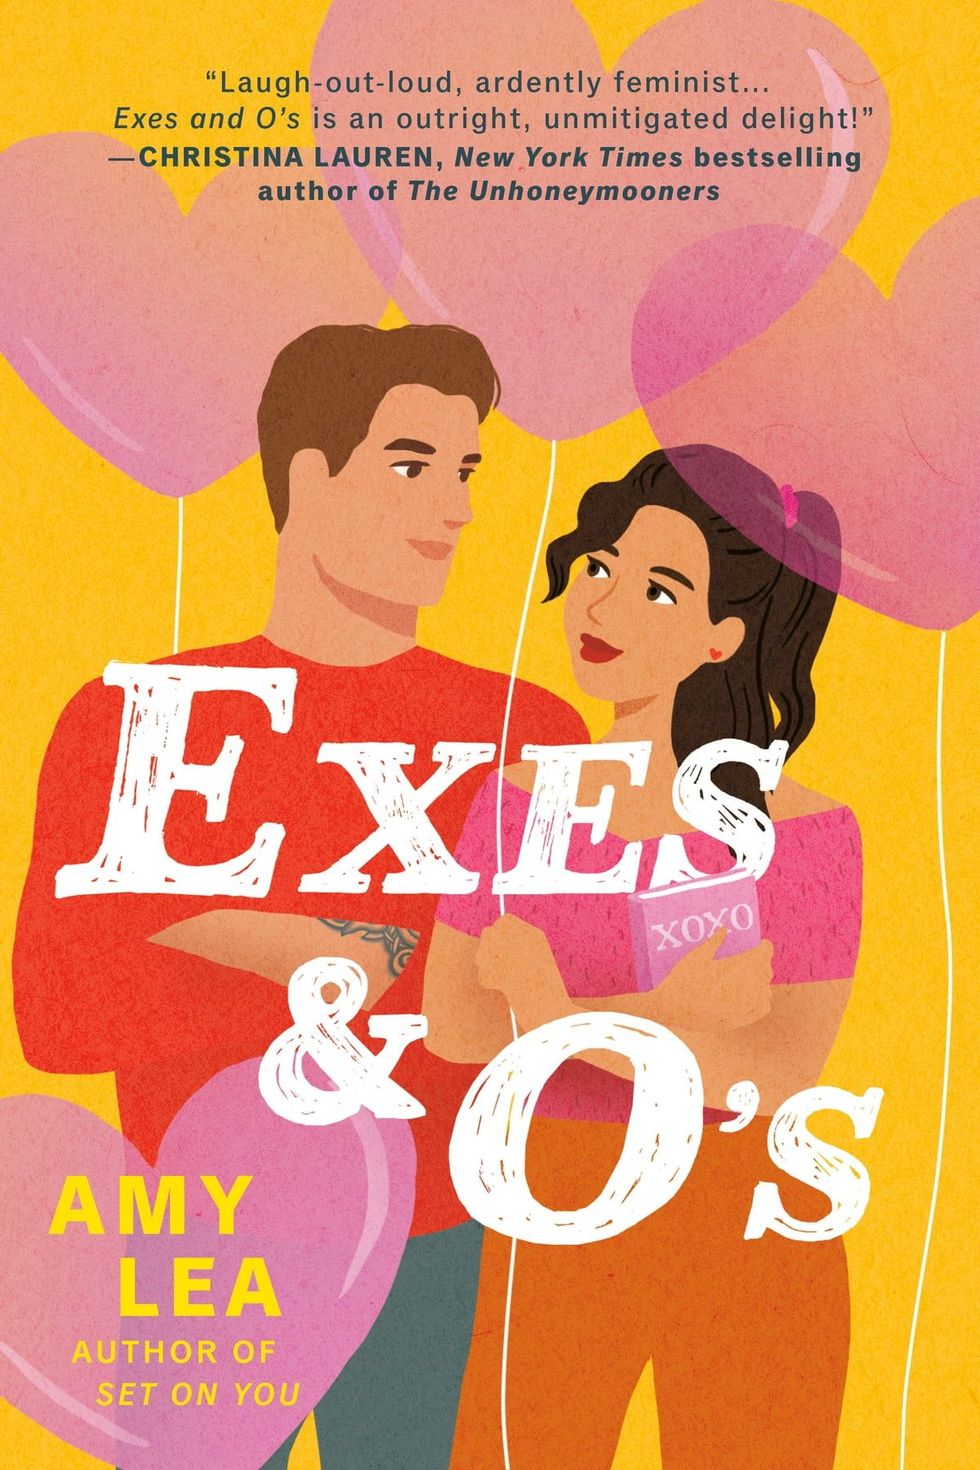 'Exes and O's' by Amy Lea